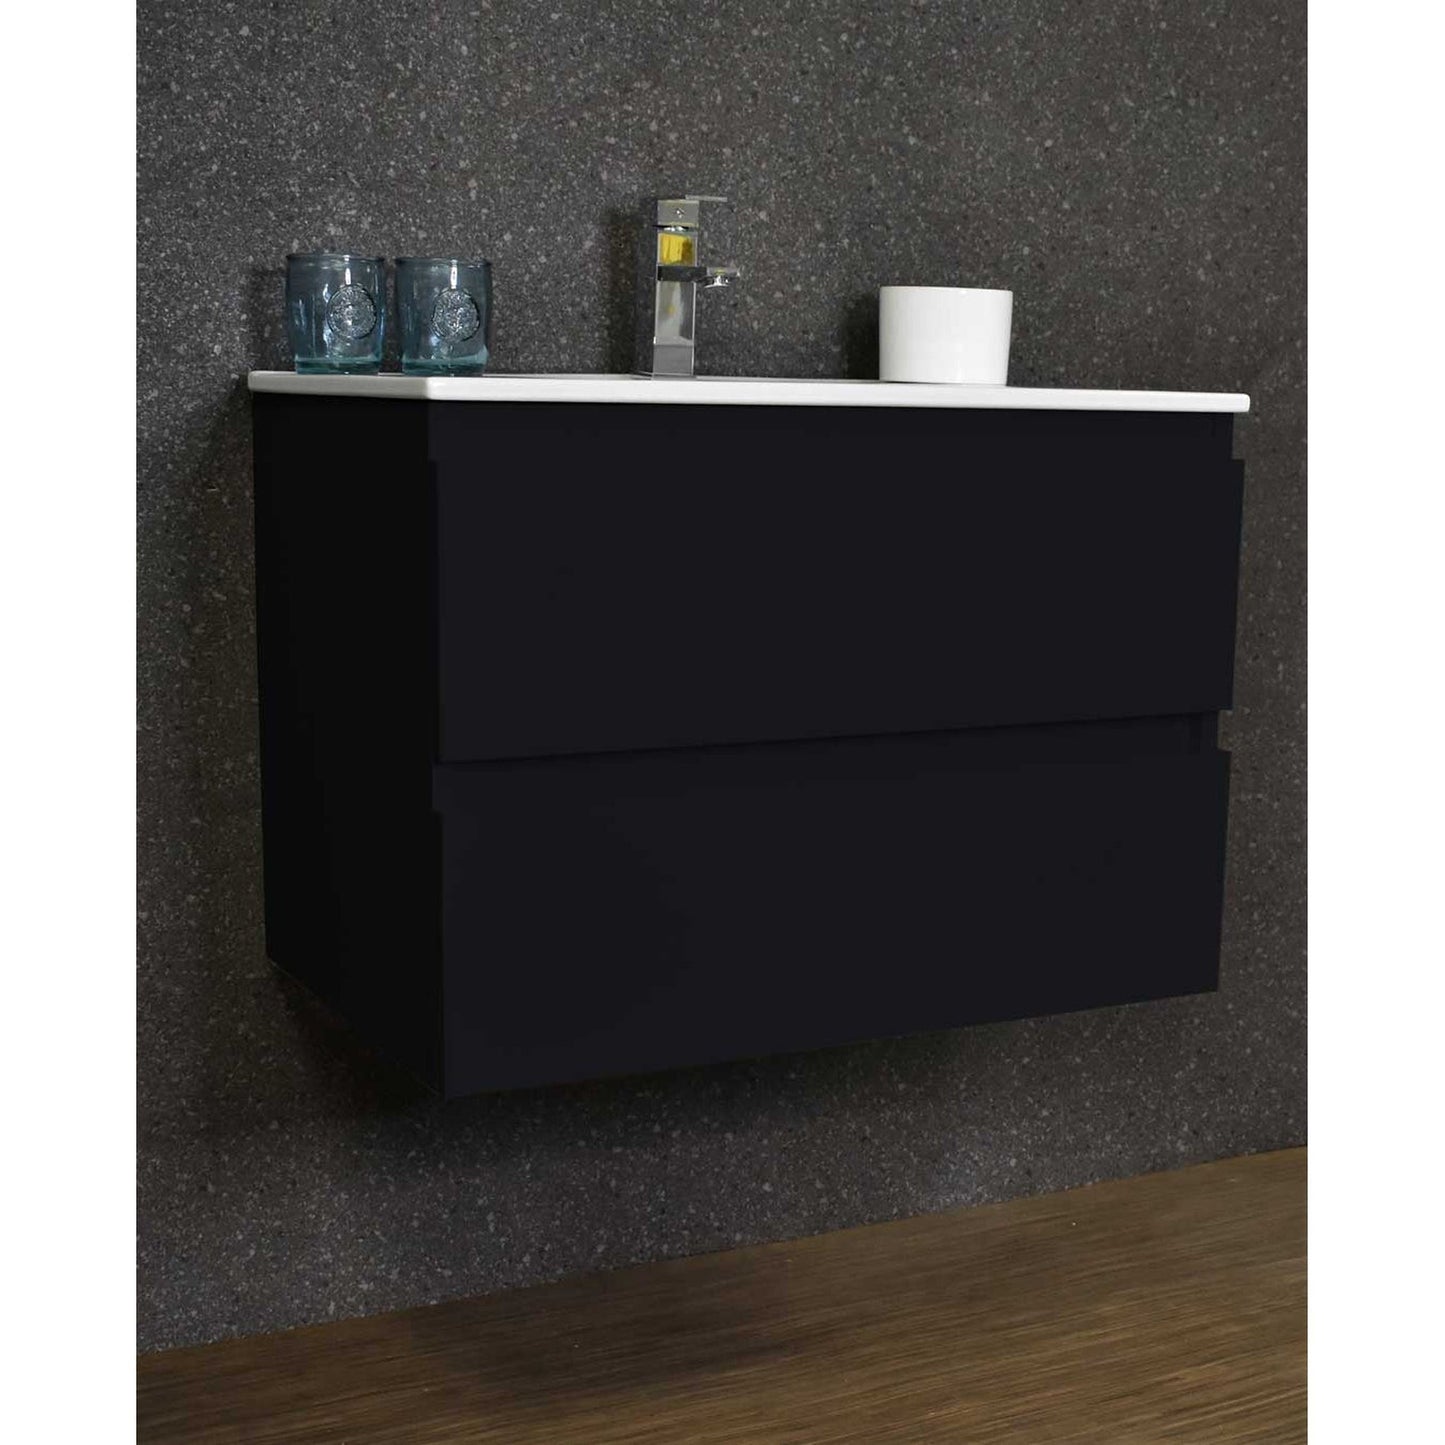 Volpa USA Salt 24" x 18" Black Wall-Mounted Floating Bathroom Vanity With Drawers, Integrated Porcelain Ceramic Top and Ceramic Sink